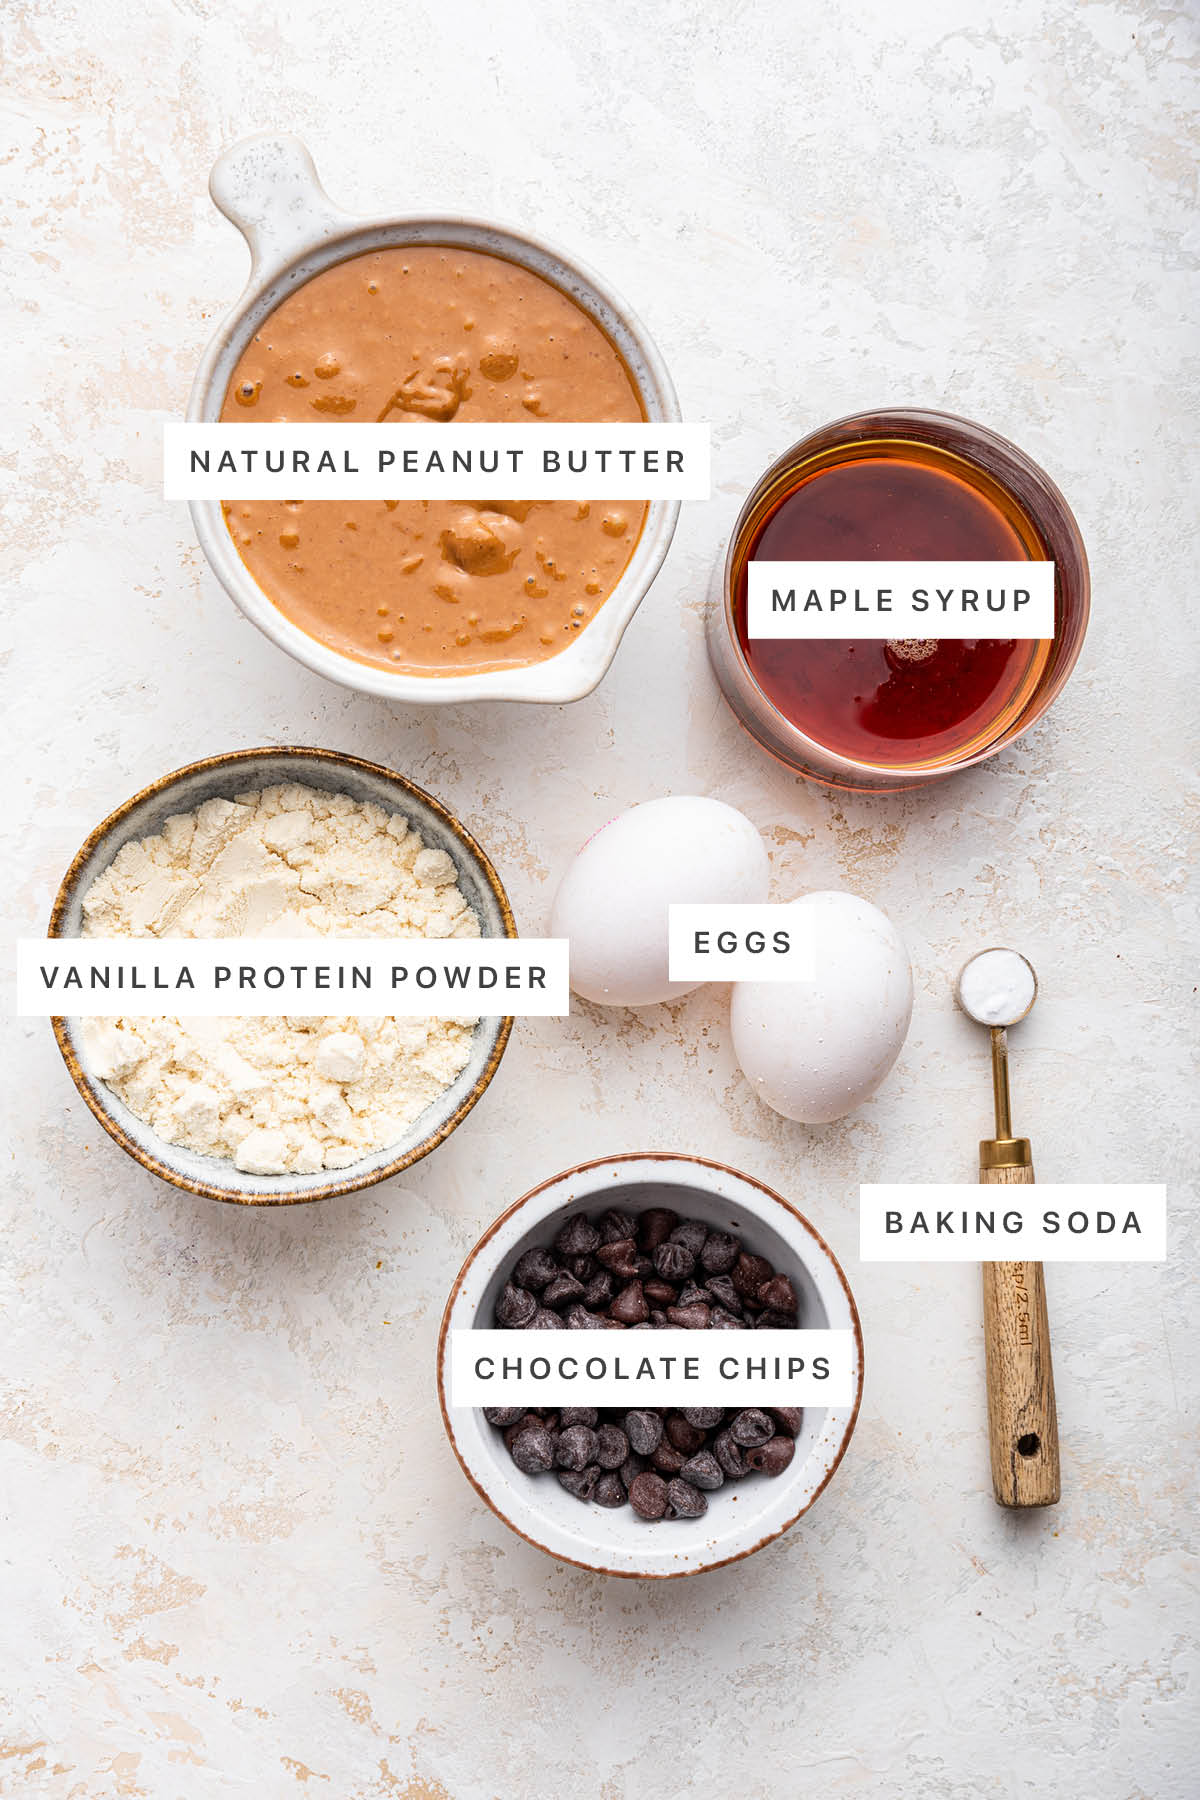 Ingredients measured out to make Protein Cookies: natural peanut butter, maple syrup, vanilla protein powder, eggs, chocolate chips and baking soda.